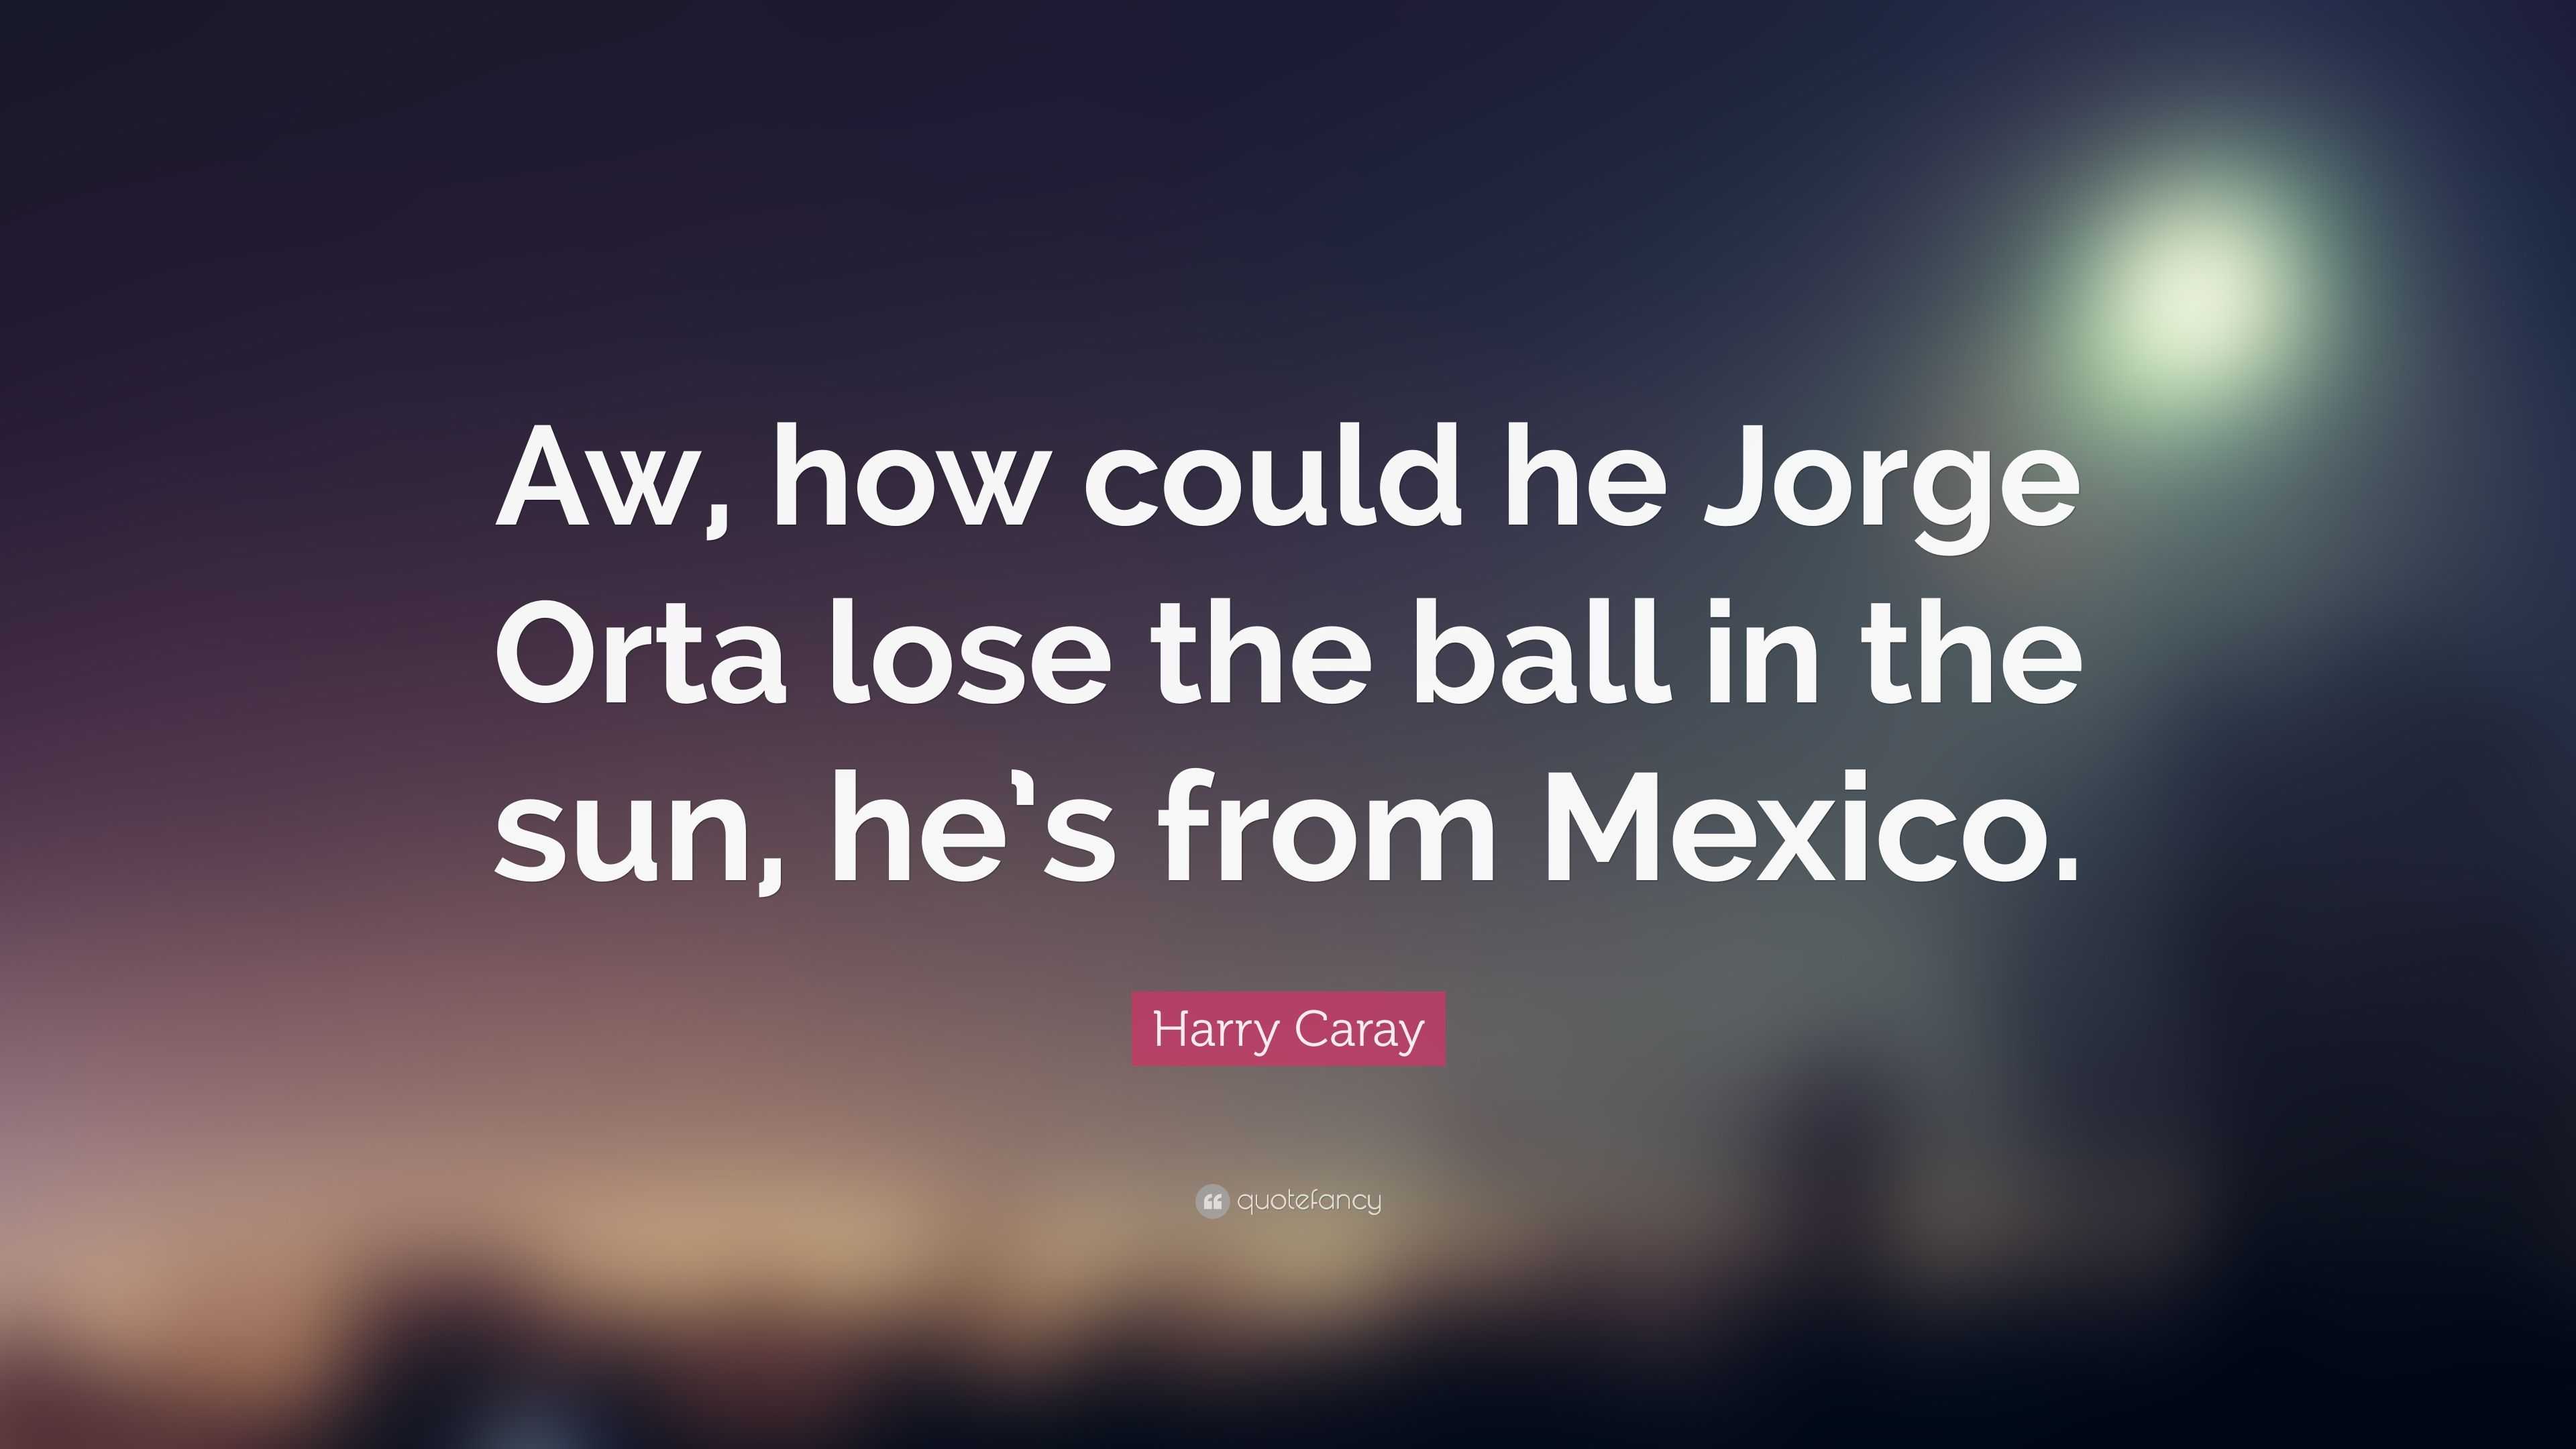 Harry Caray Quote: “Aw, how could he Jorge Orta lose the ball in the